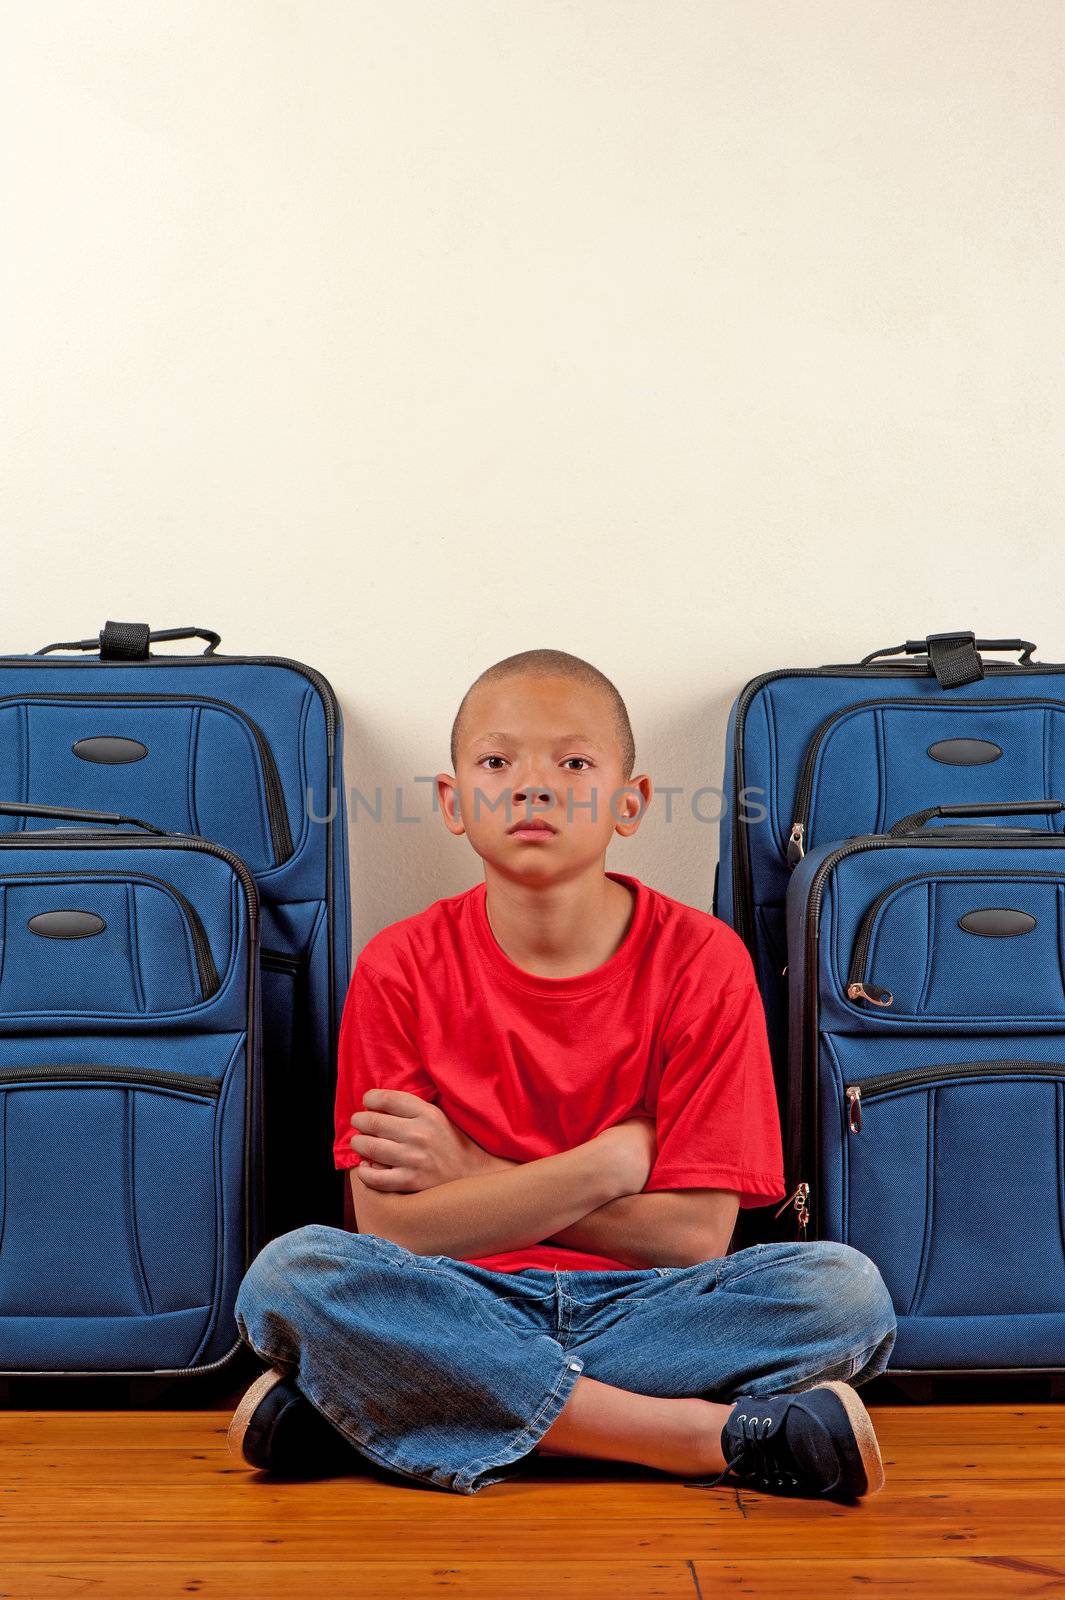 A boy sitting in front of suitcases appears upset.